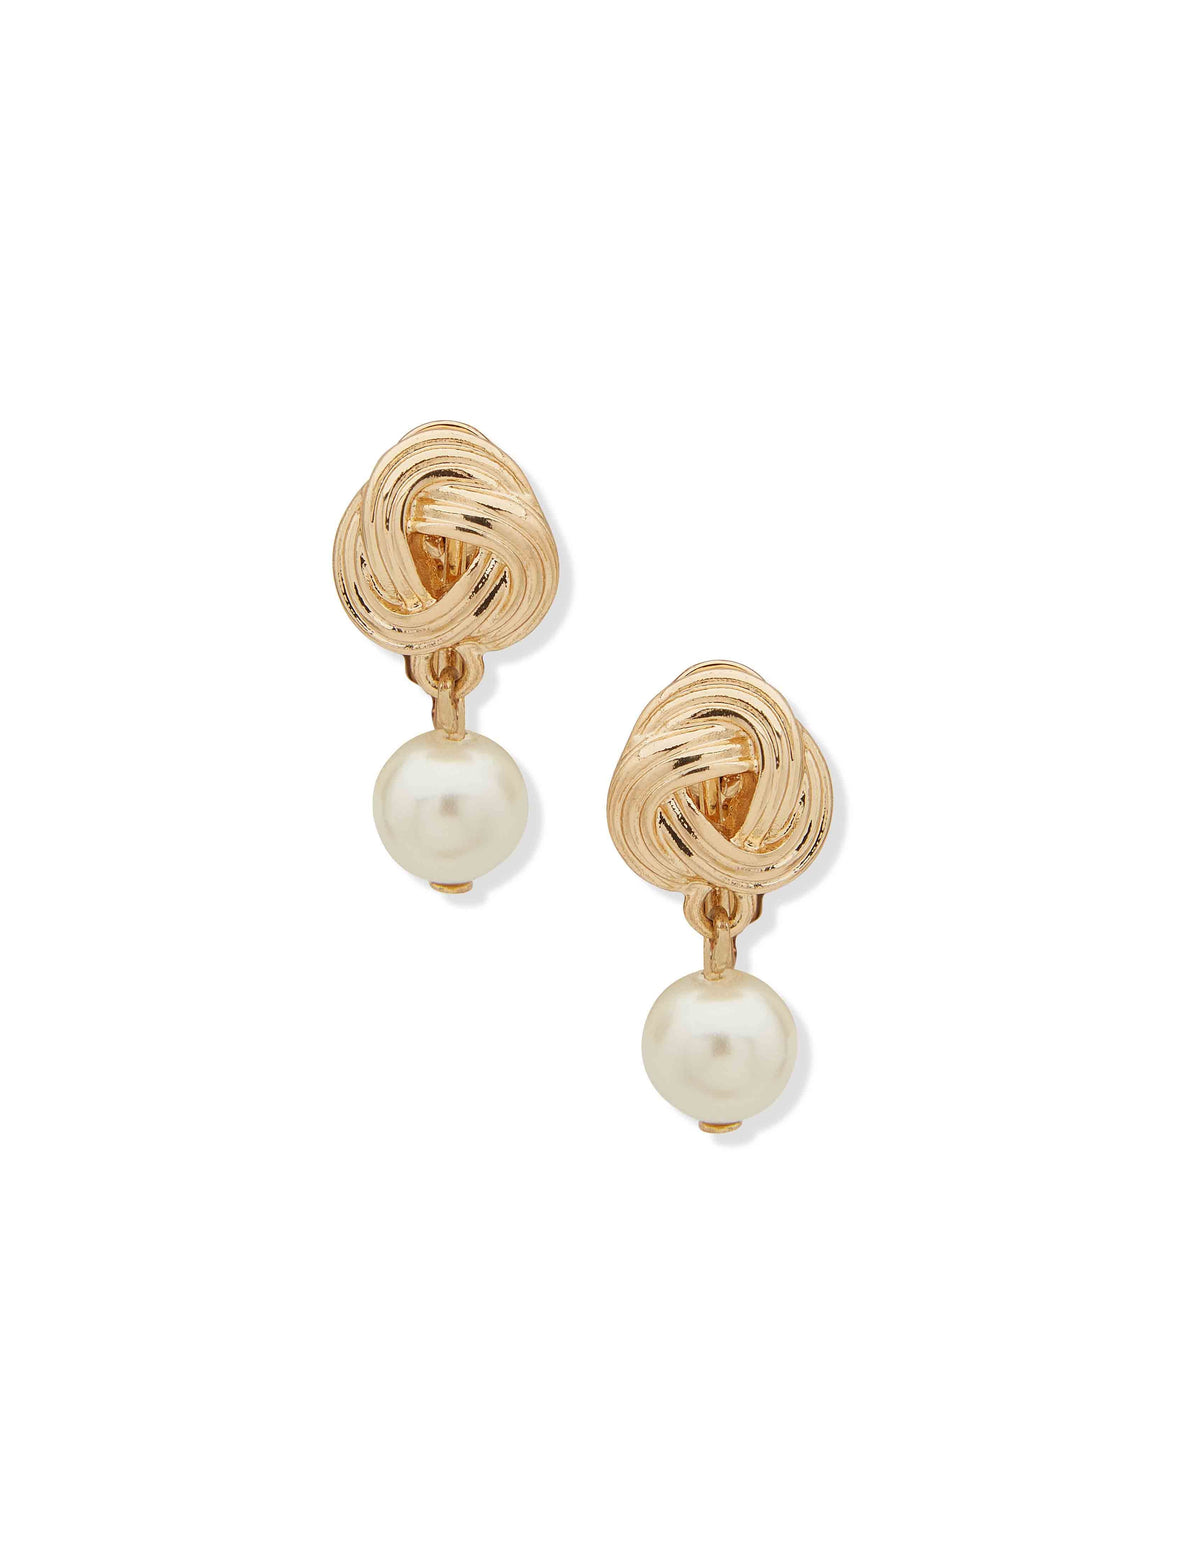 Anne Klein Gold Tone Knot With Faux Pearl Clip Earrings